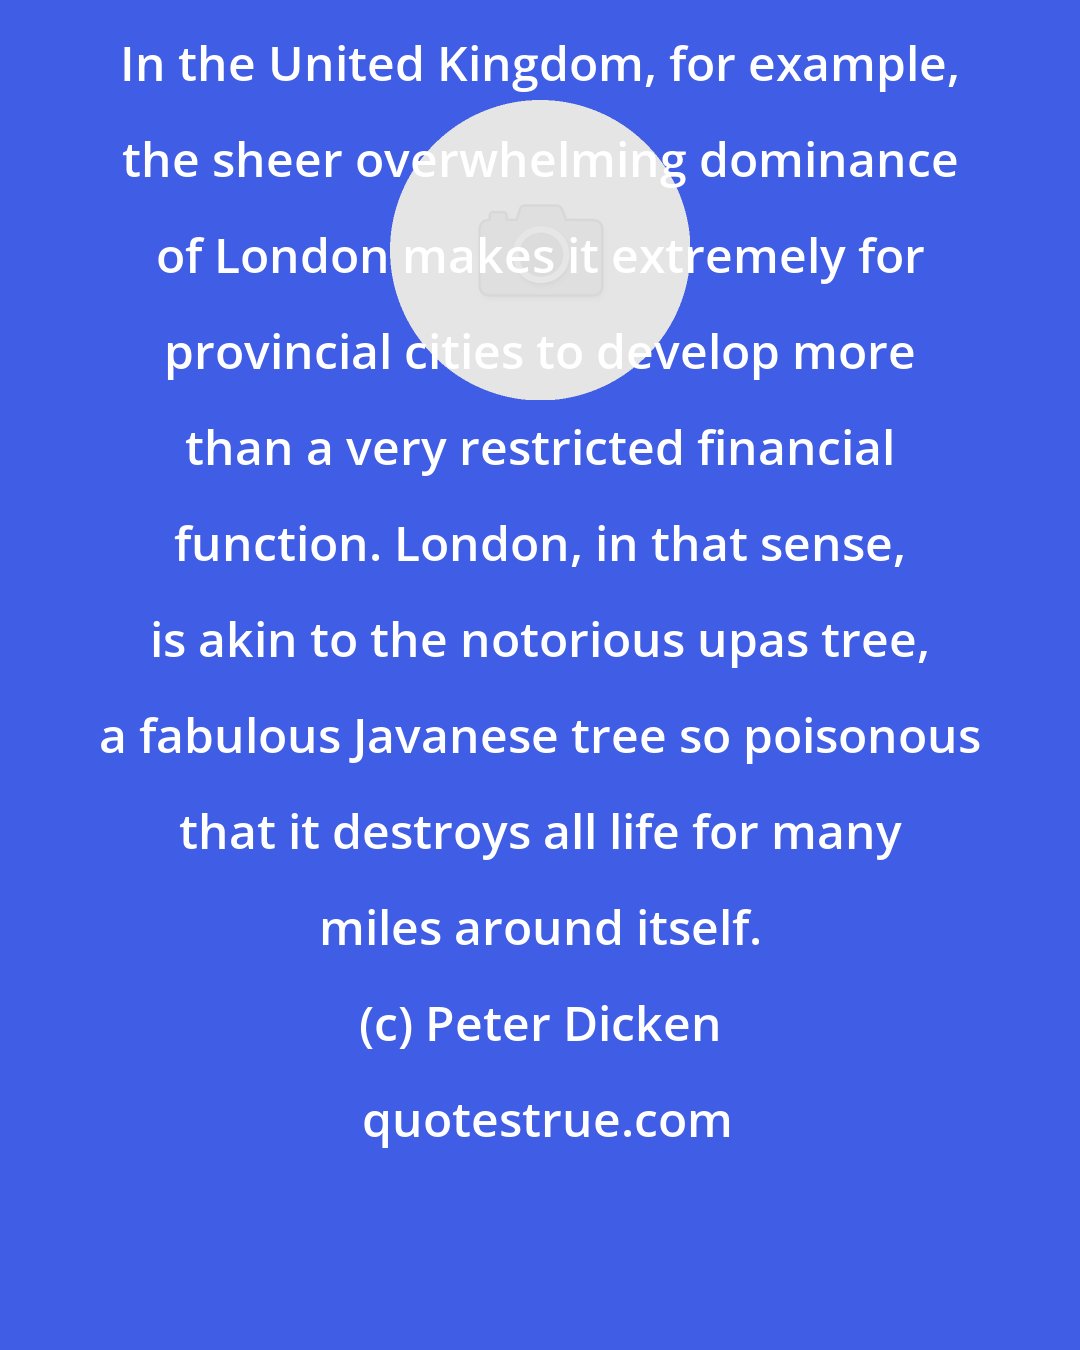 Peter Dicken: In the United Kingdom, for example, the sheer overwhelming dominance of London makes it extremely for provincial cities to develop more than a very restricted financial function. London, in that sense, is akin to the notorious upas tree, a fabulous Javanese tree so poisonous that it destroys all life for many miles around itself.